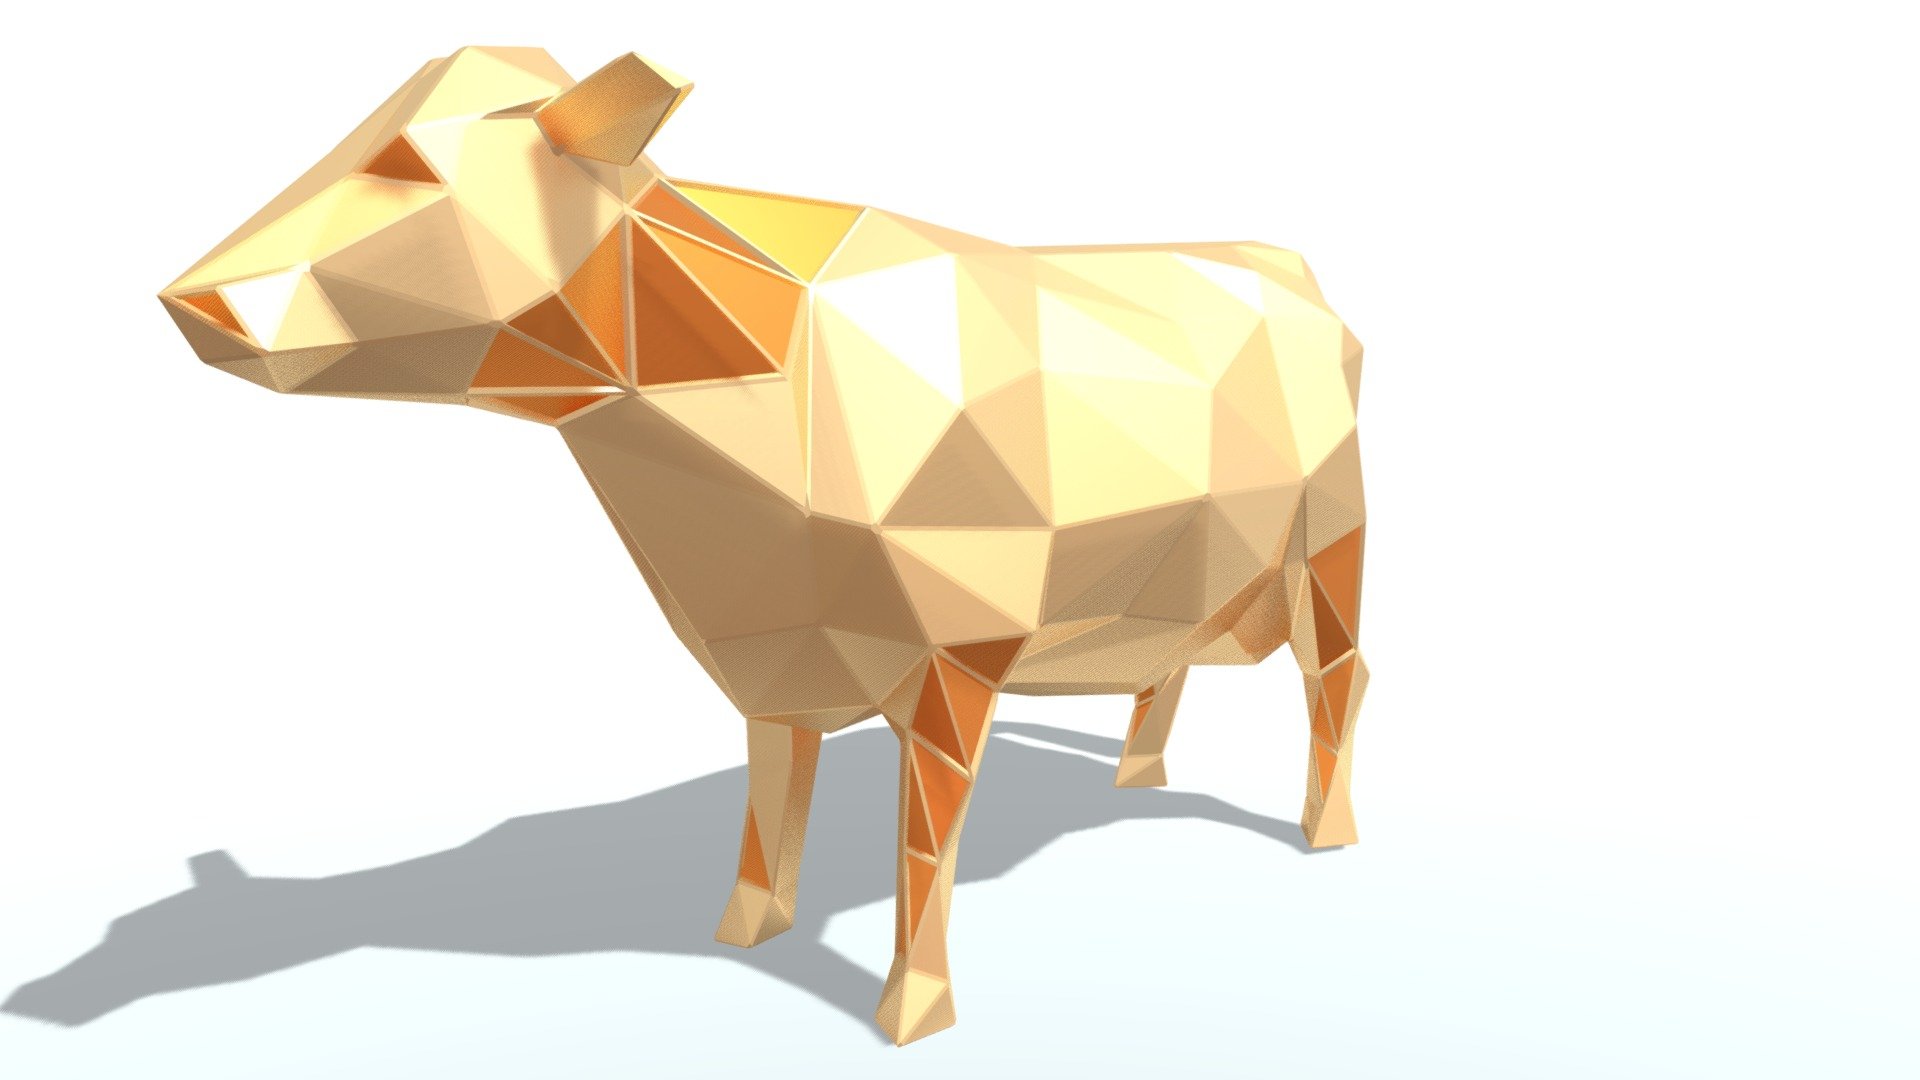 Polygonal 3D Model with Parametric modeling with gold material, make it recommend for :




Basic modeling 

Rigging 

sculpting 

Become Statue

Decorate

3D Print File

Toy

Have fun  :) - Polygonal Cow Parametric - Buy Royalty Free 3D model by Puppy3D 3d model